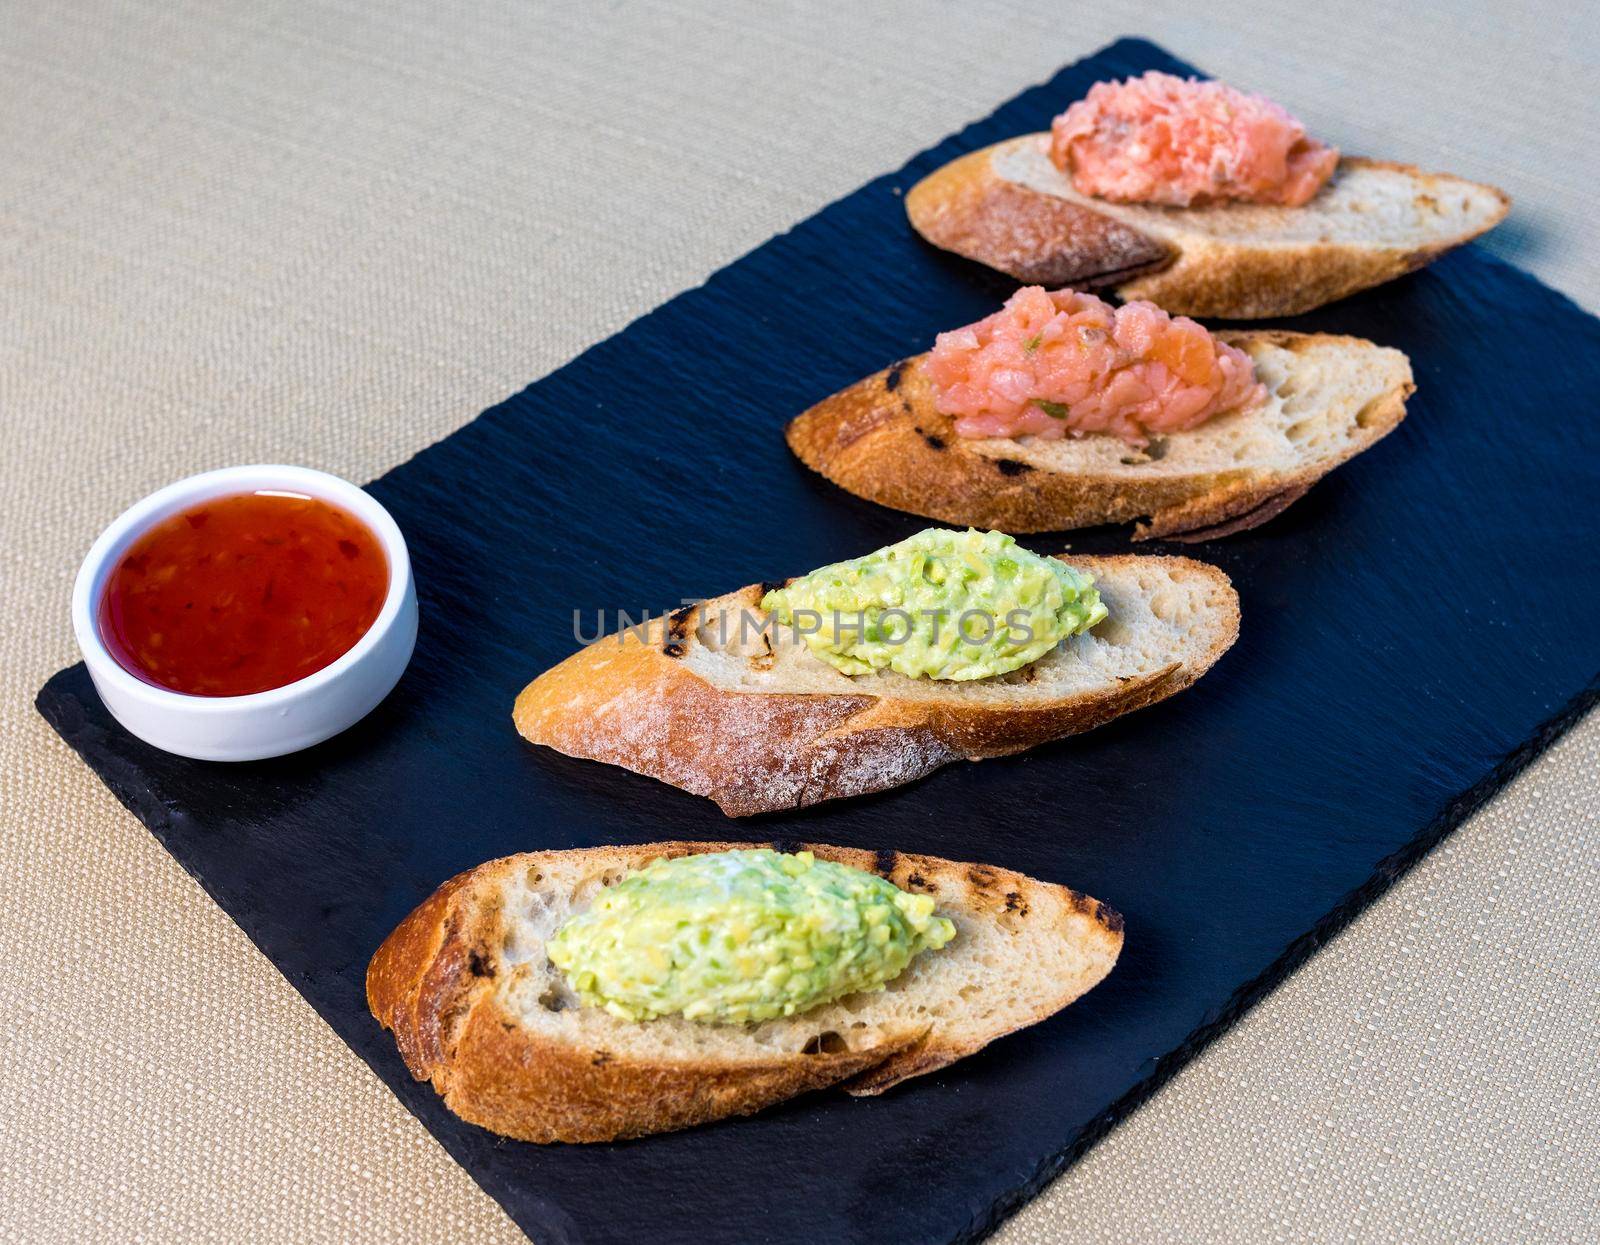 Tasty wasabi on the bread tapas with sauce garnish by ferhad